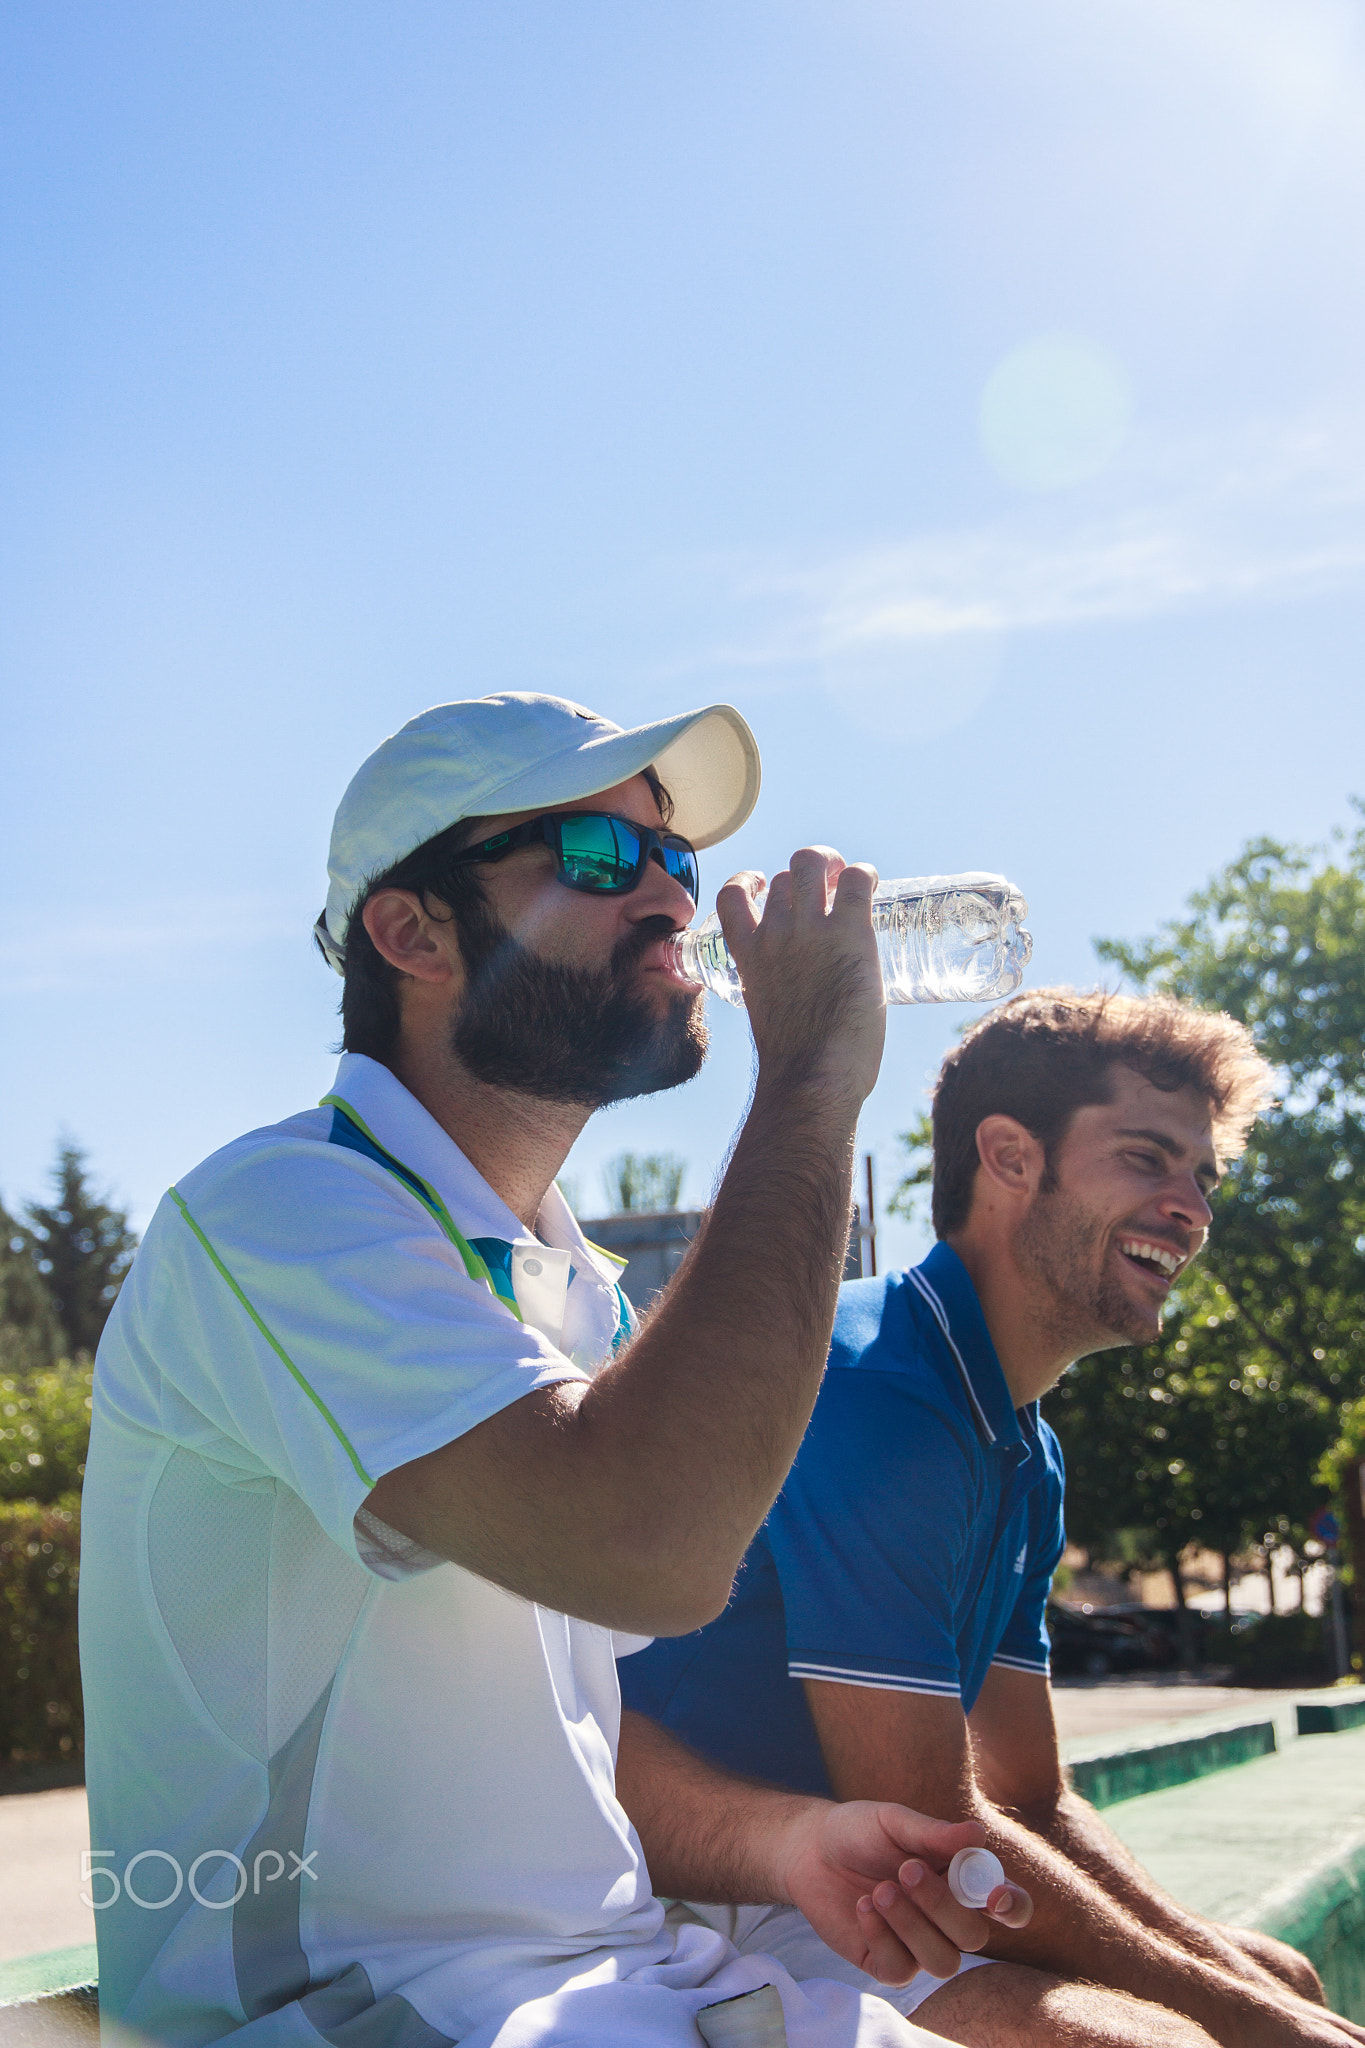 Two professional players hydrating after a hard game of tennis